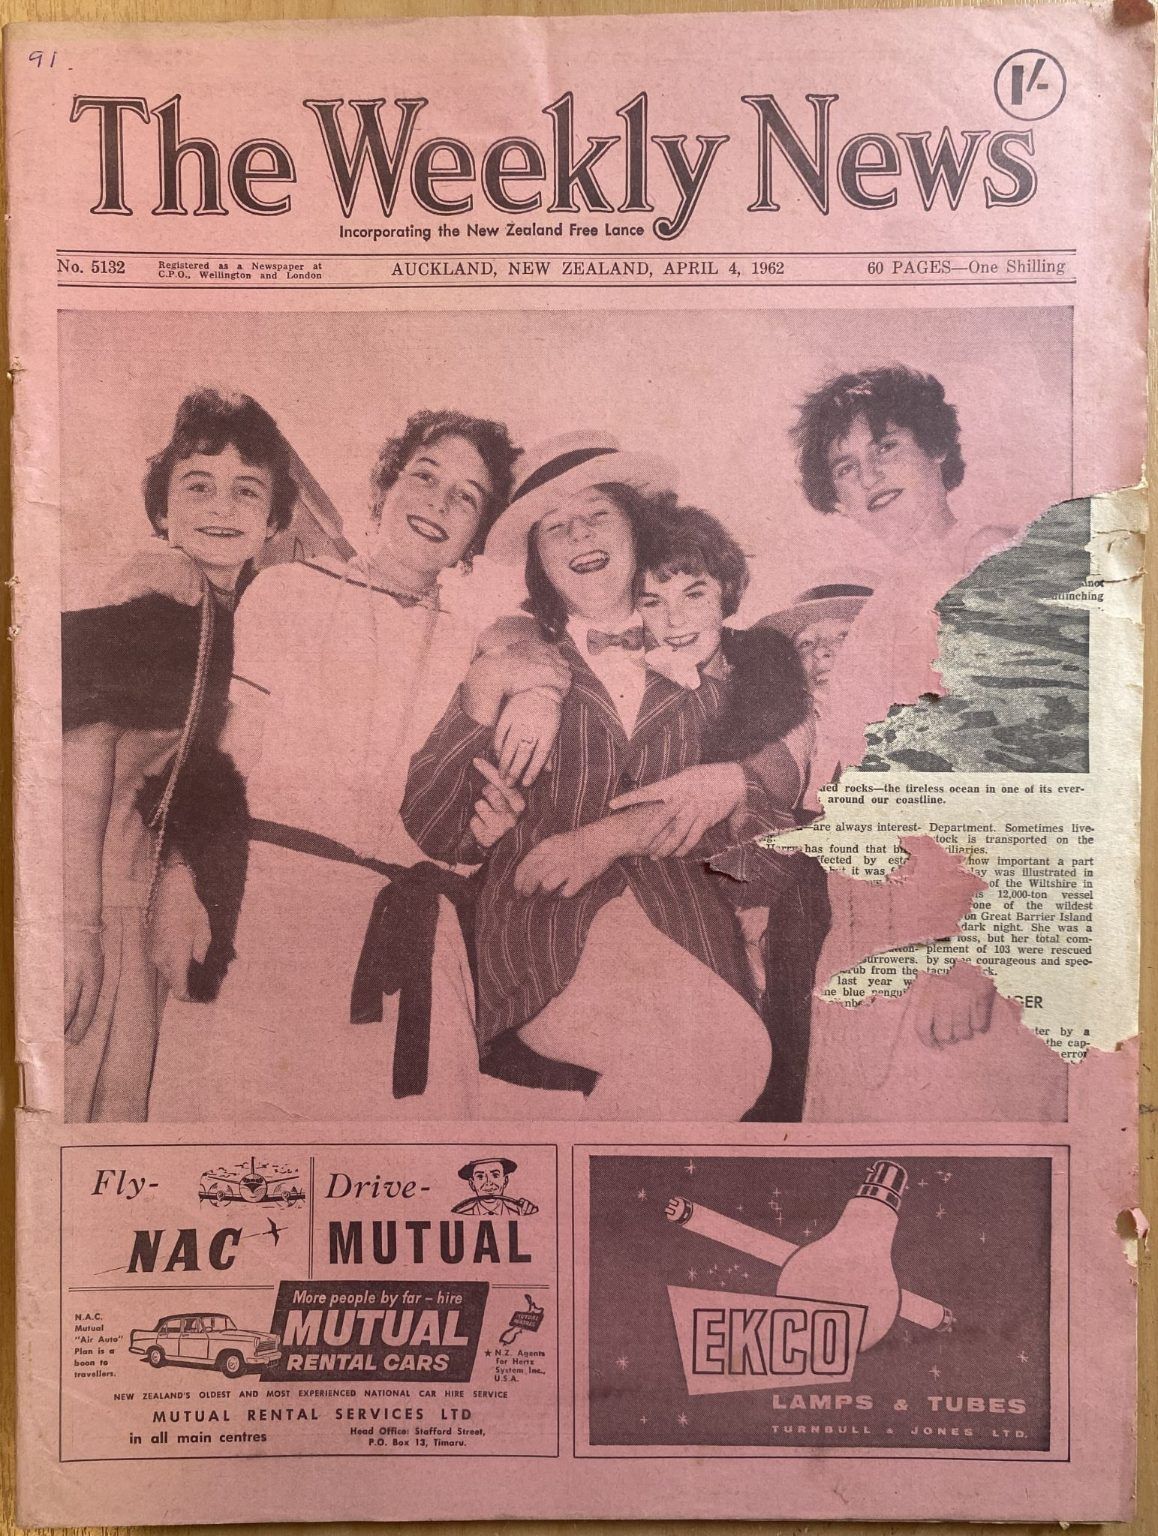 OLD NEWSPAPER: The Weekly News, No. 5132, 4 April 1962